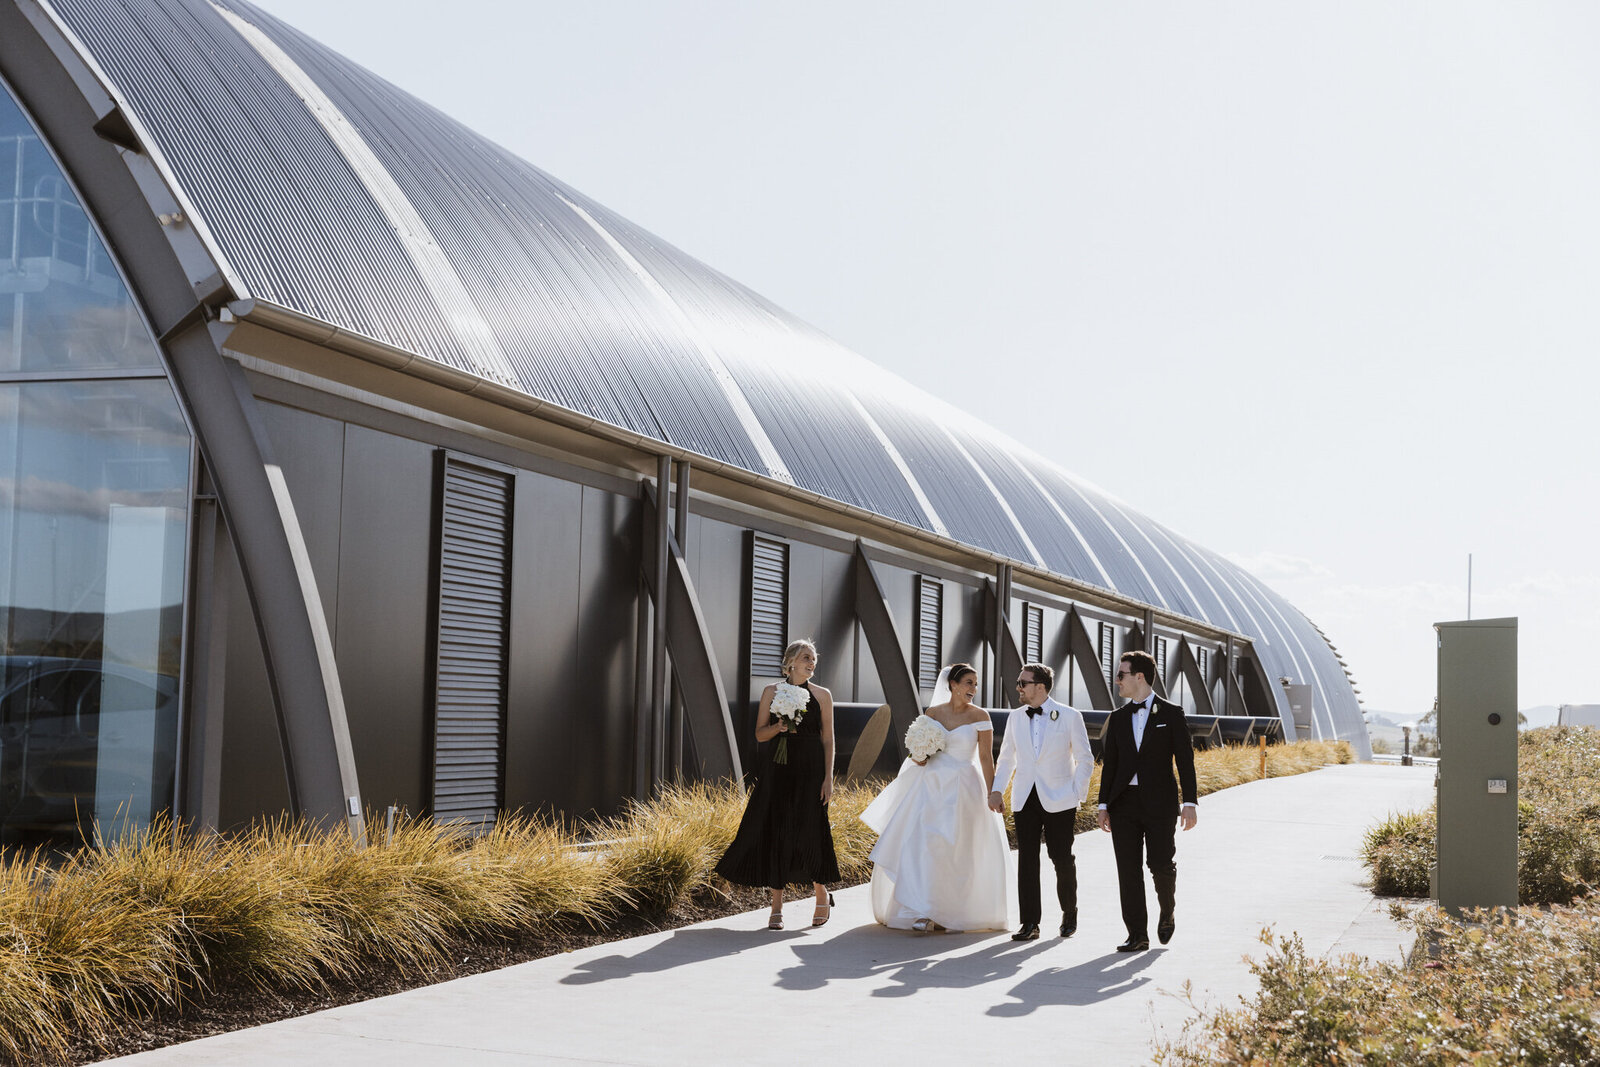 People getting married at levantine hill by wedding photographer ada and ivy